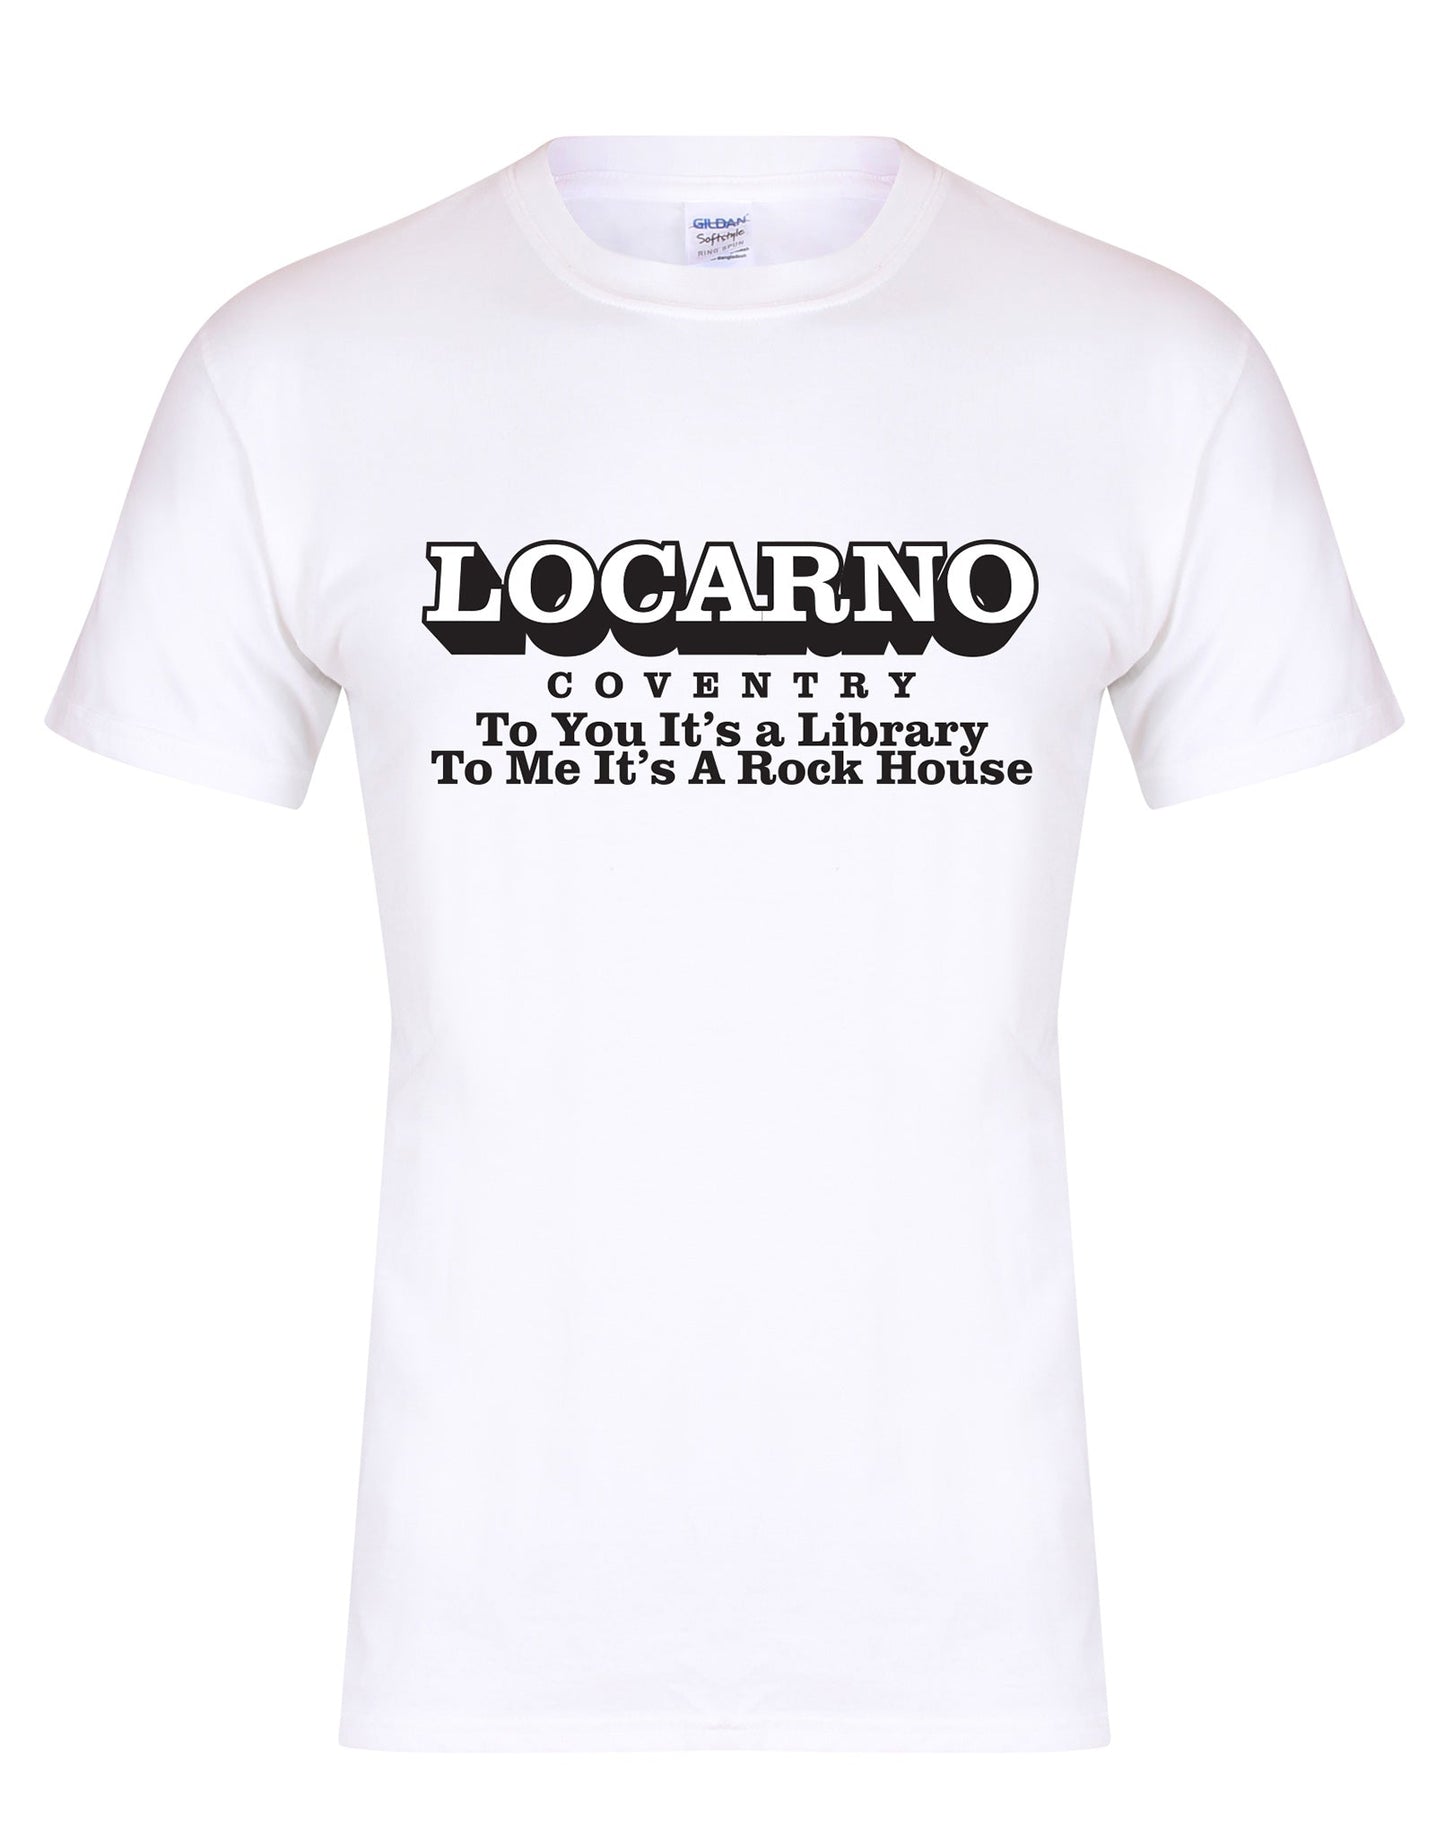 Locarno/Rockhouse - Coventry - unisex fit T-shirt - various colours - Dirty Stop Outs